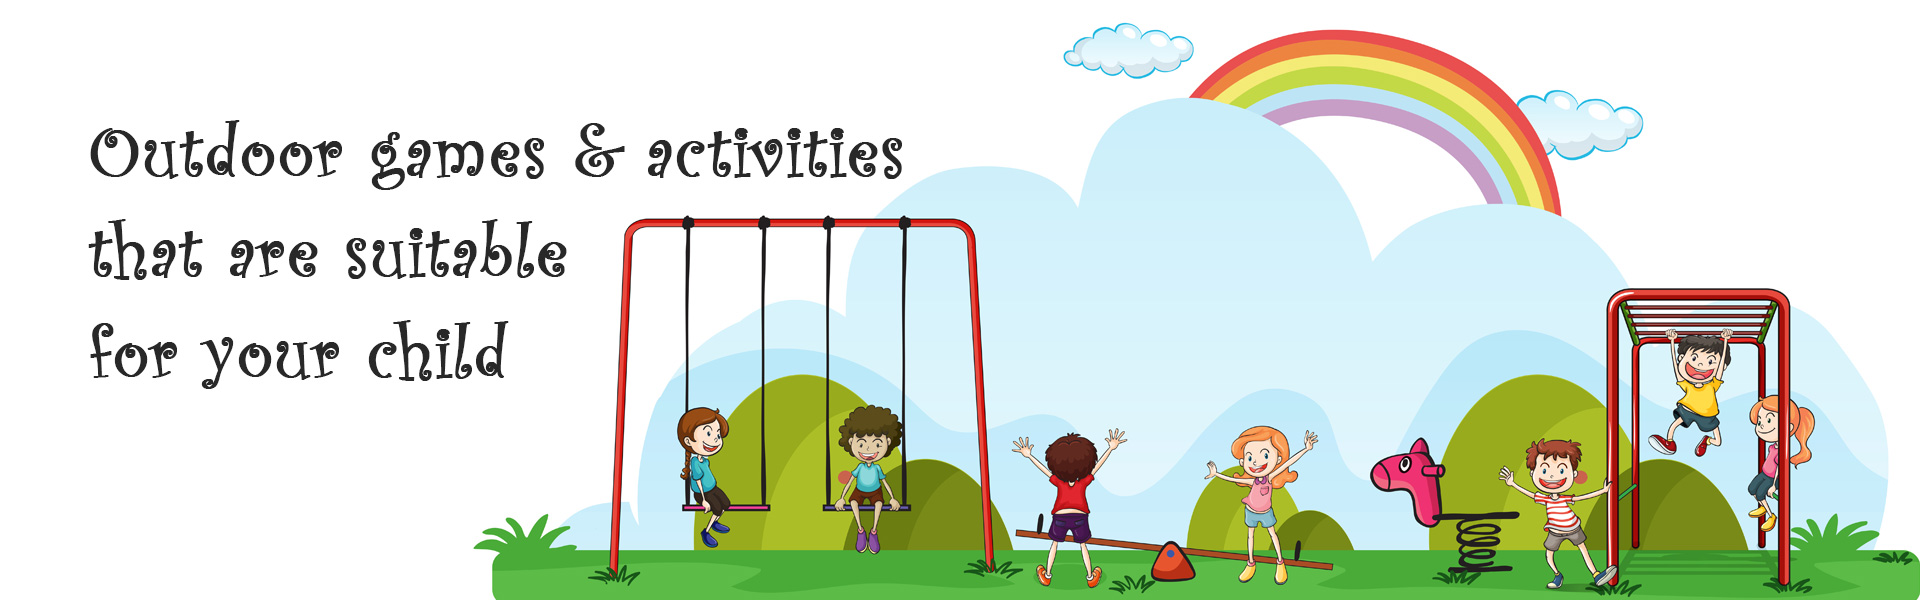 Outdoor games and activities that are suitable for your child